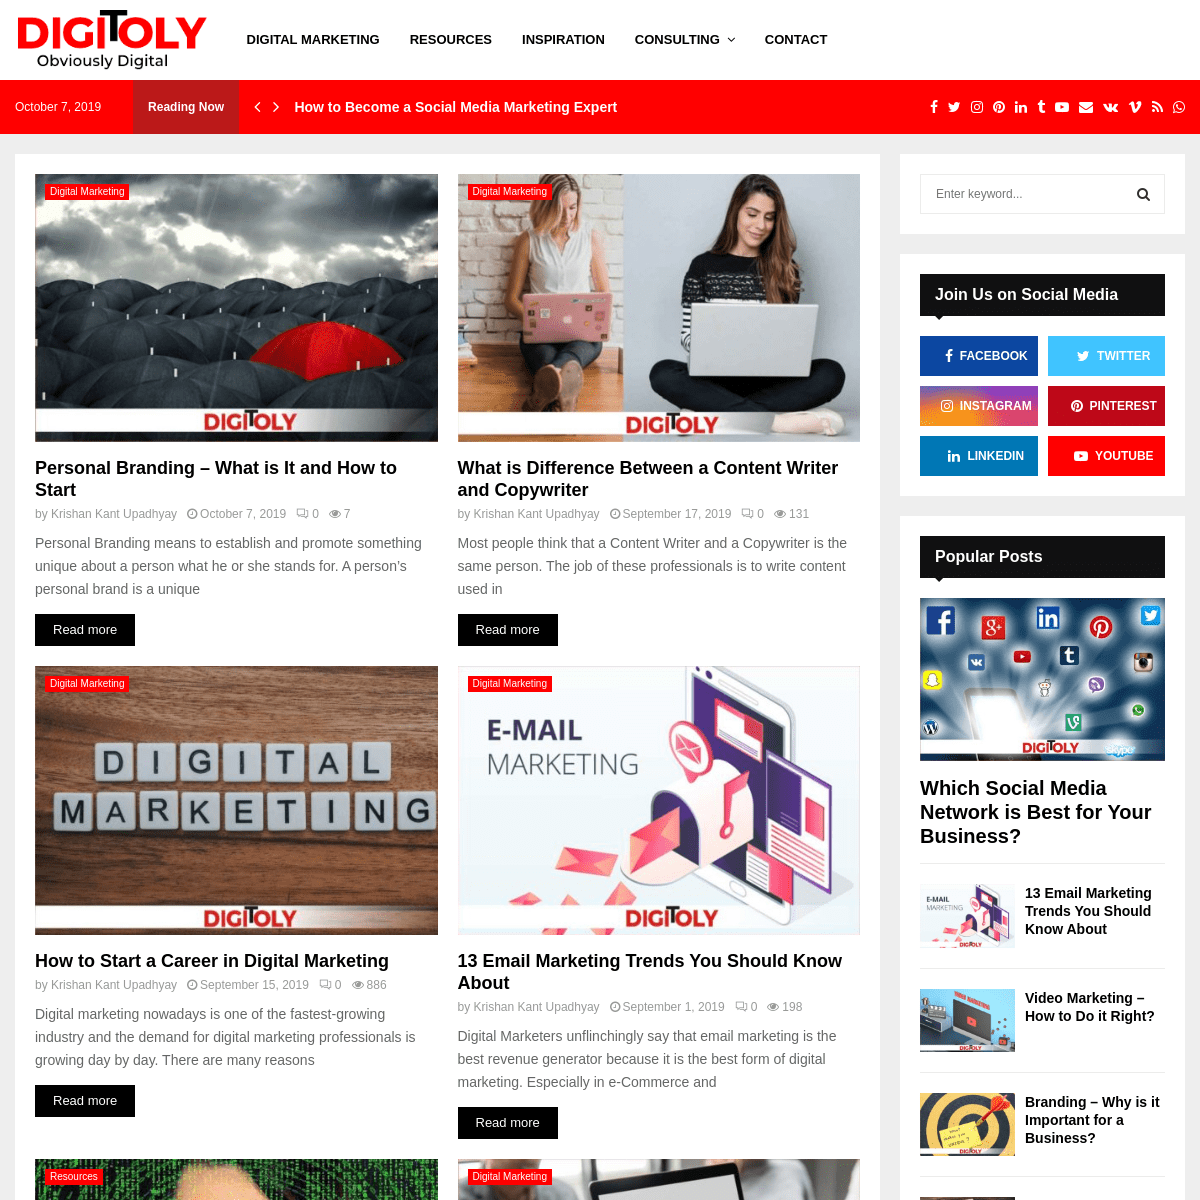 A complete backup of digitoly.com